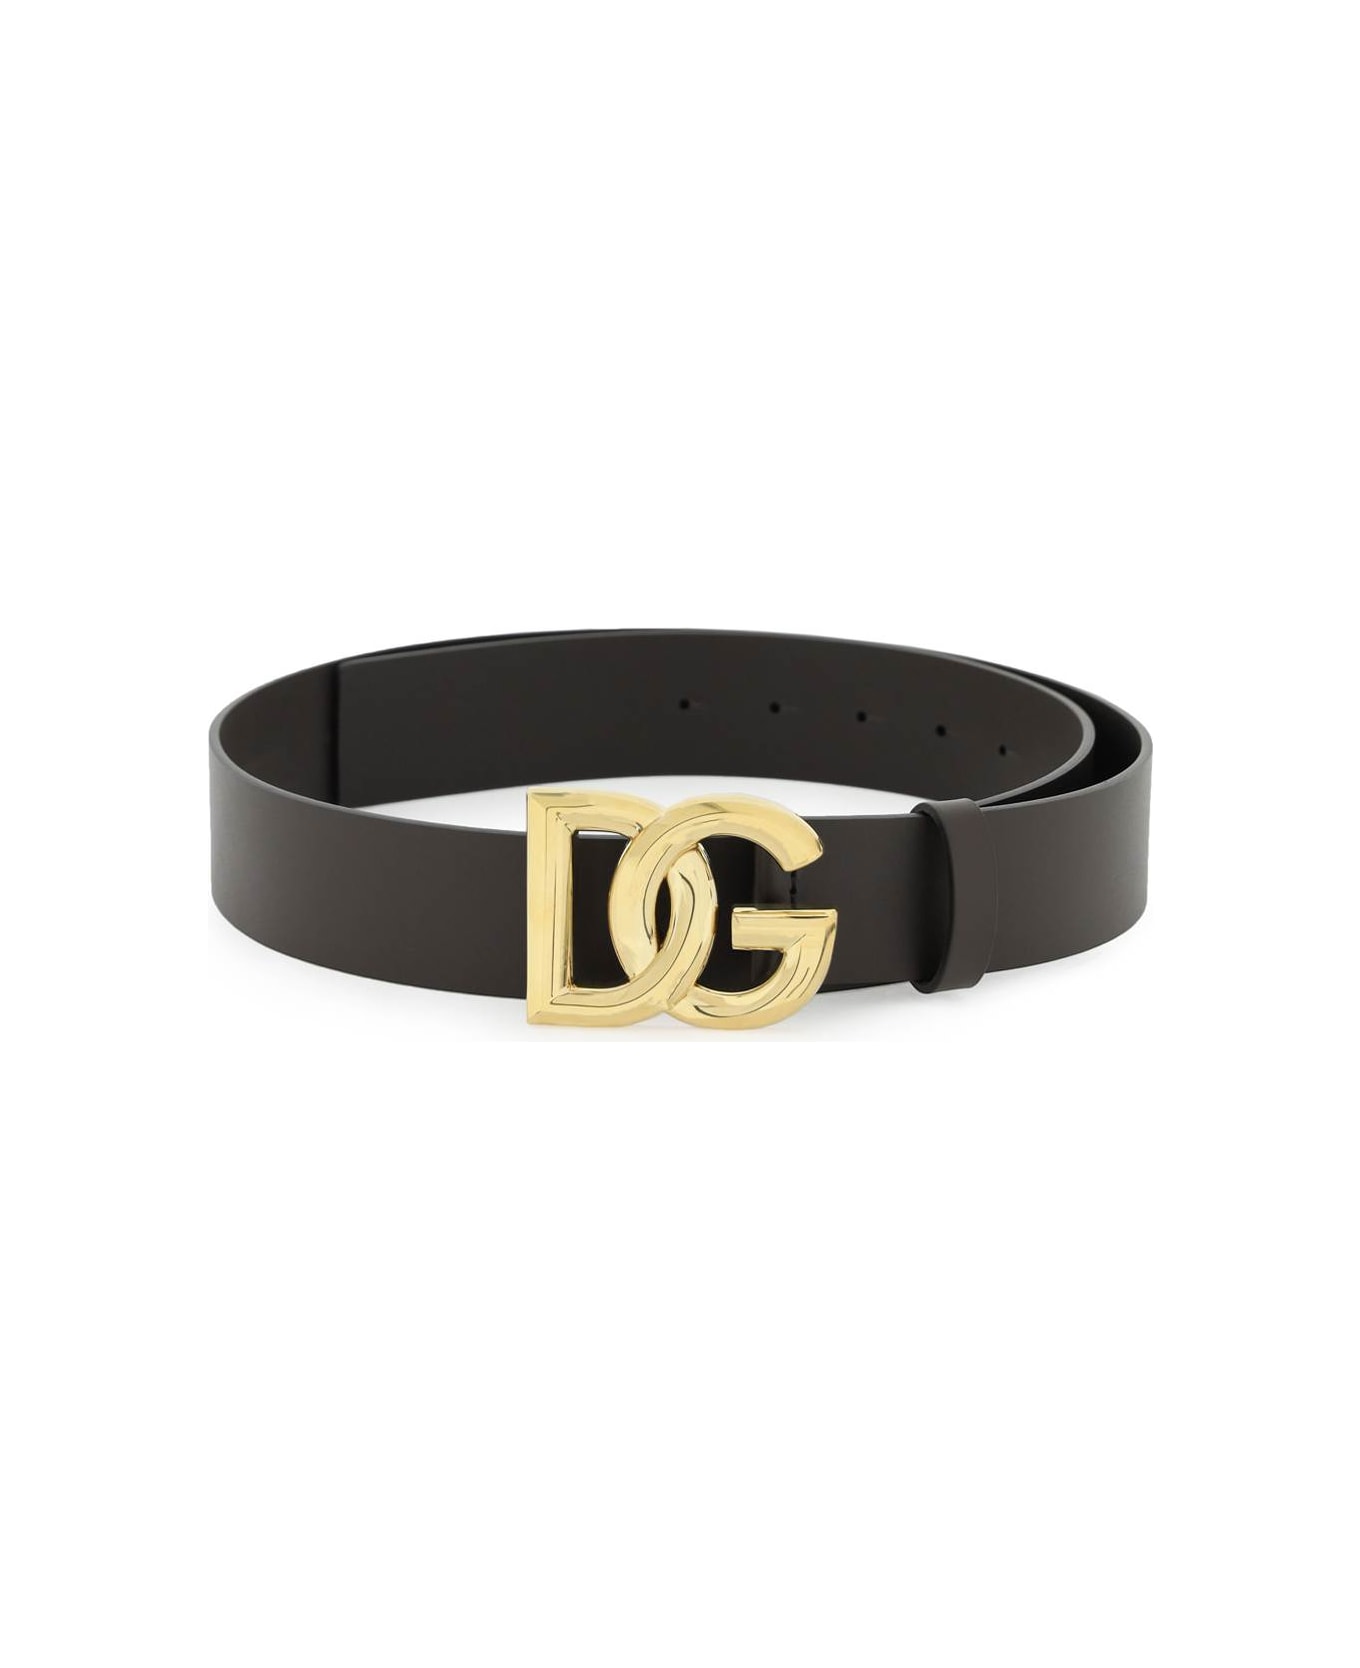 Dolce & Gabbana Lux Leather Belt With Dg Buckle - MORO ORO (Brown) ベルト